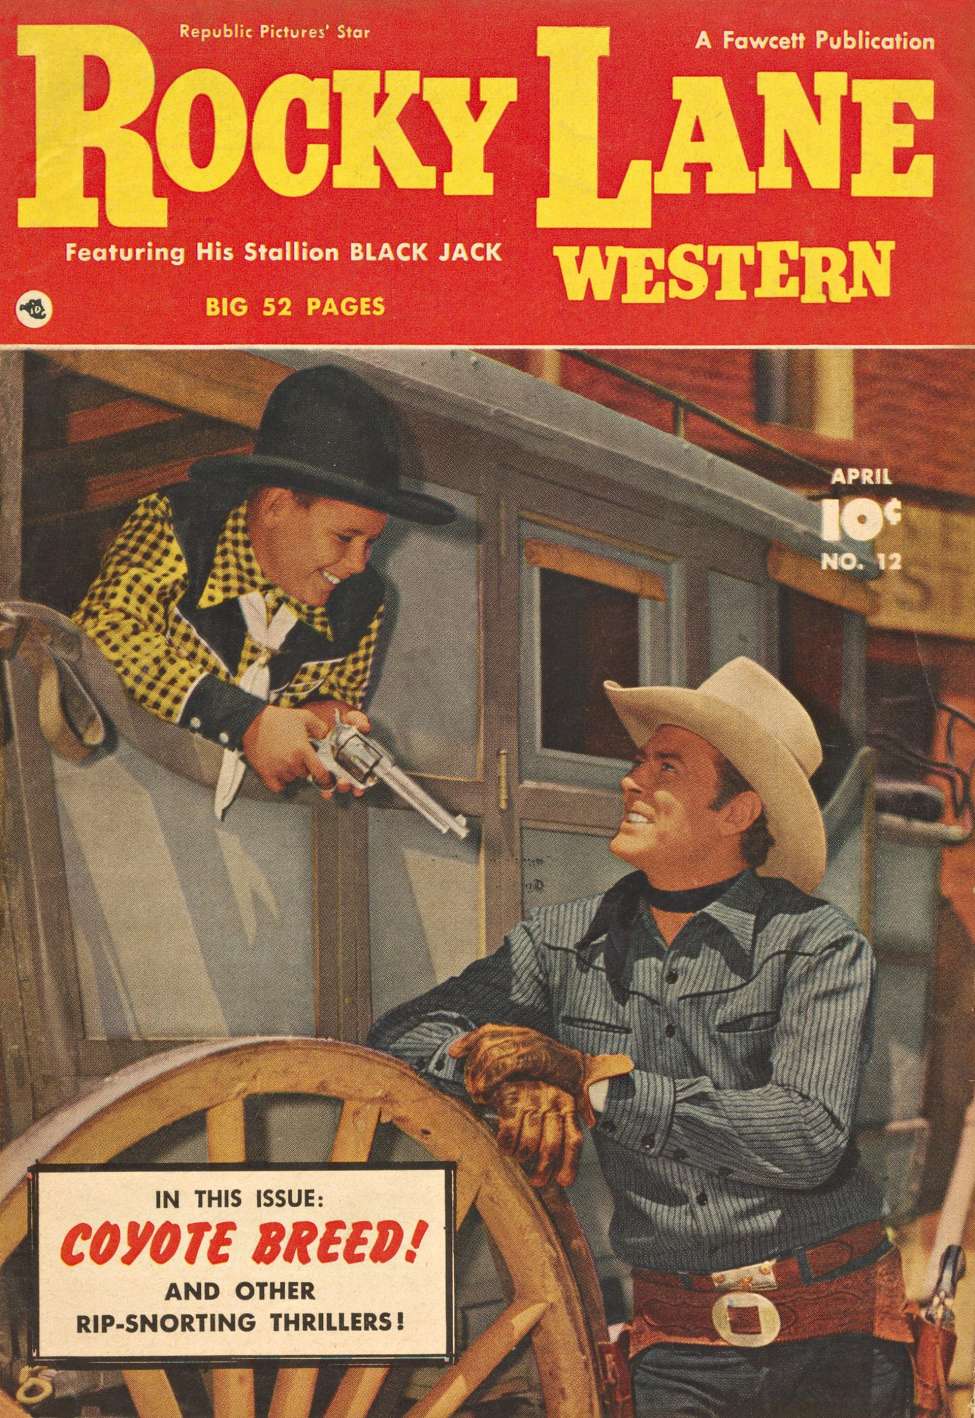 Book Cover For Rocky Lane Western 12 - Version 2